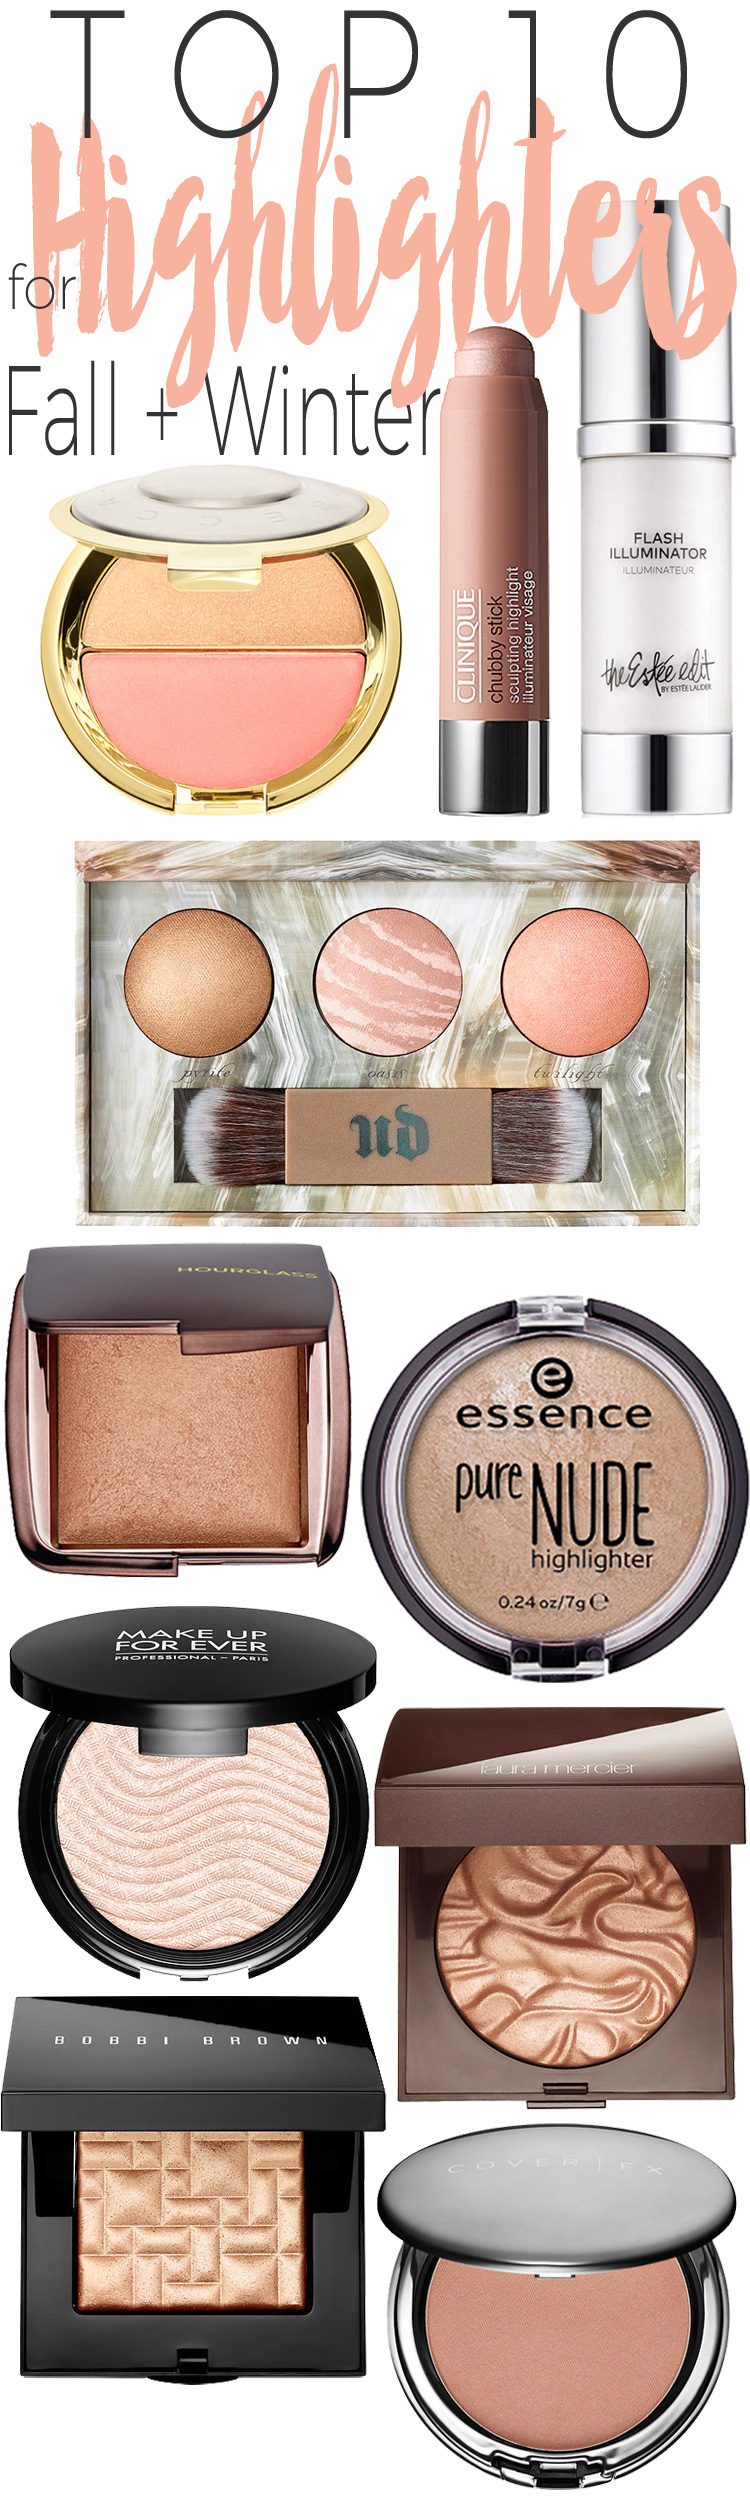 Top 10 Highlighters for Fall and Winter. — Beautiful Search